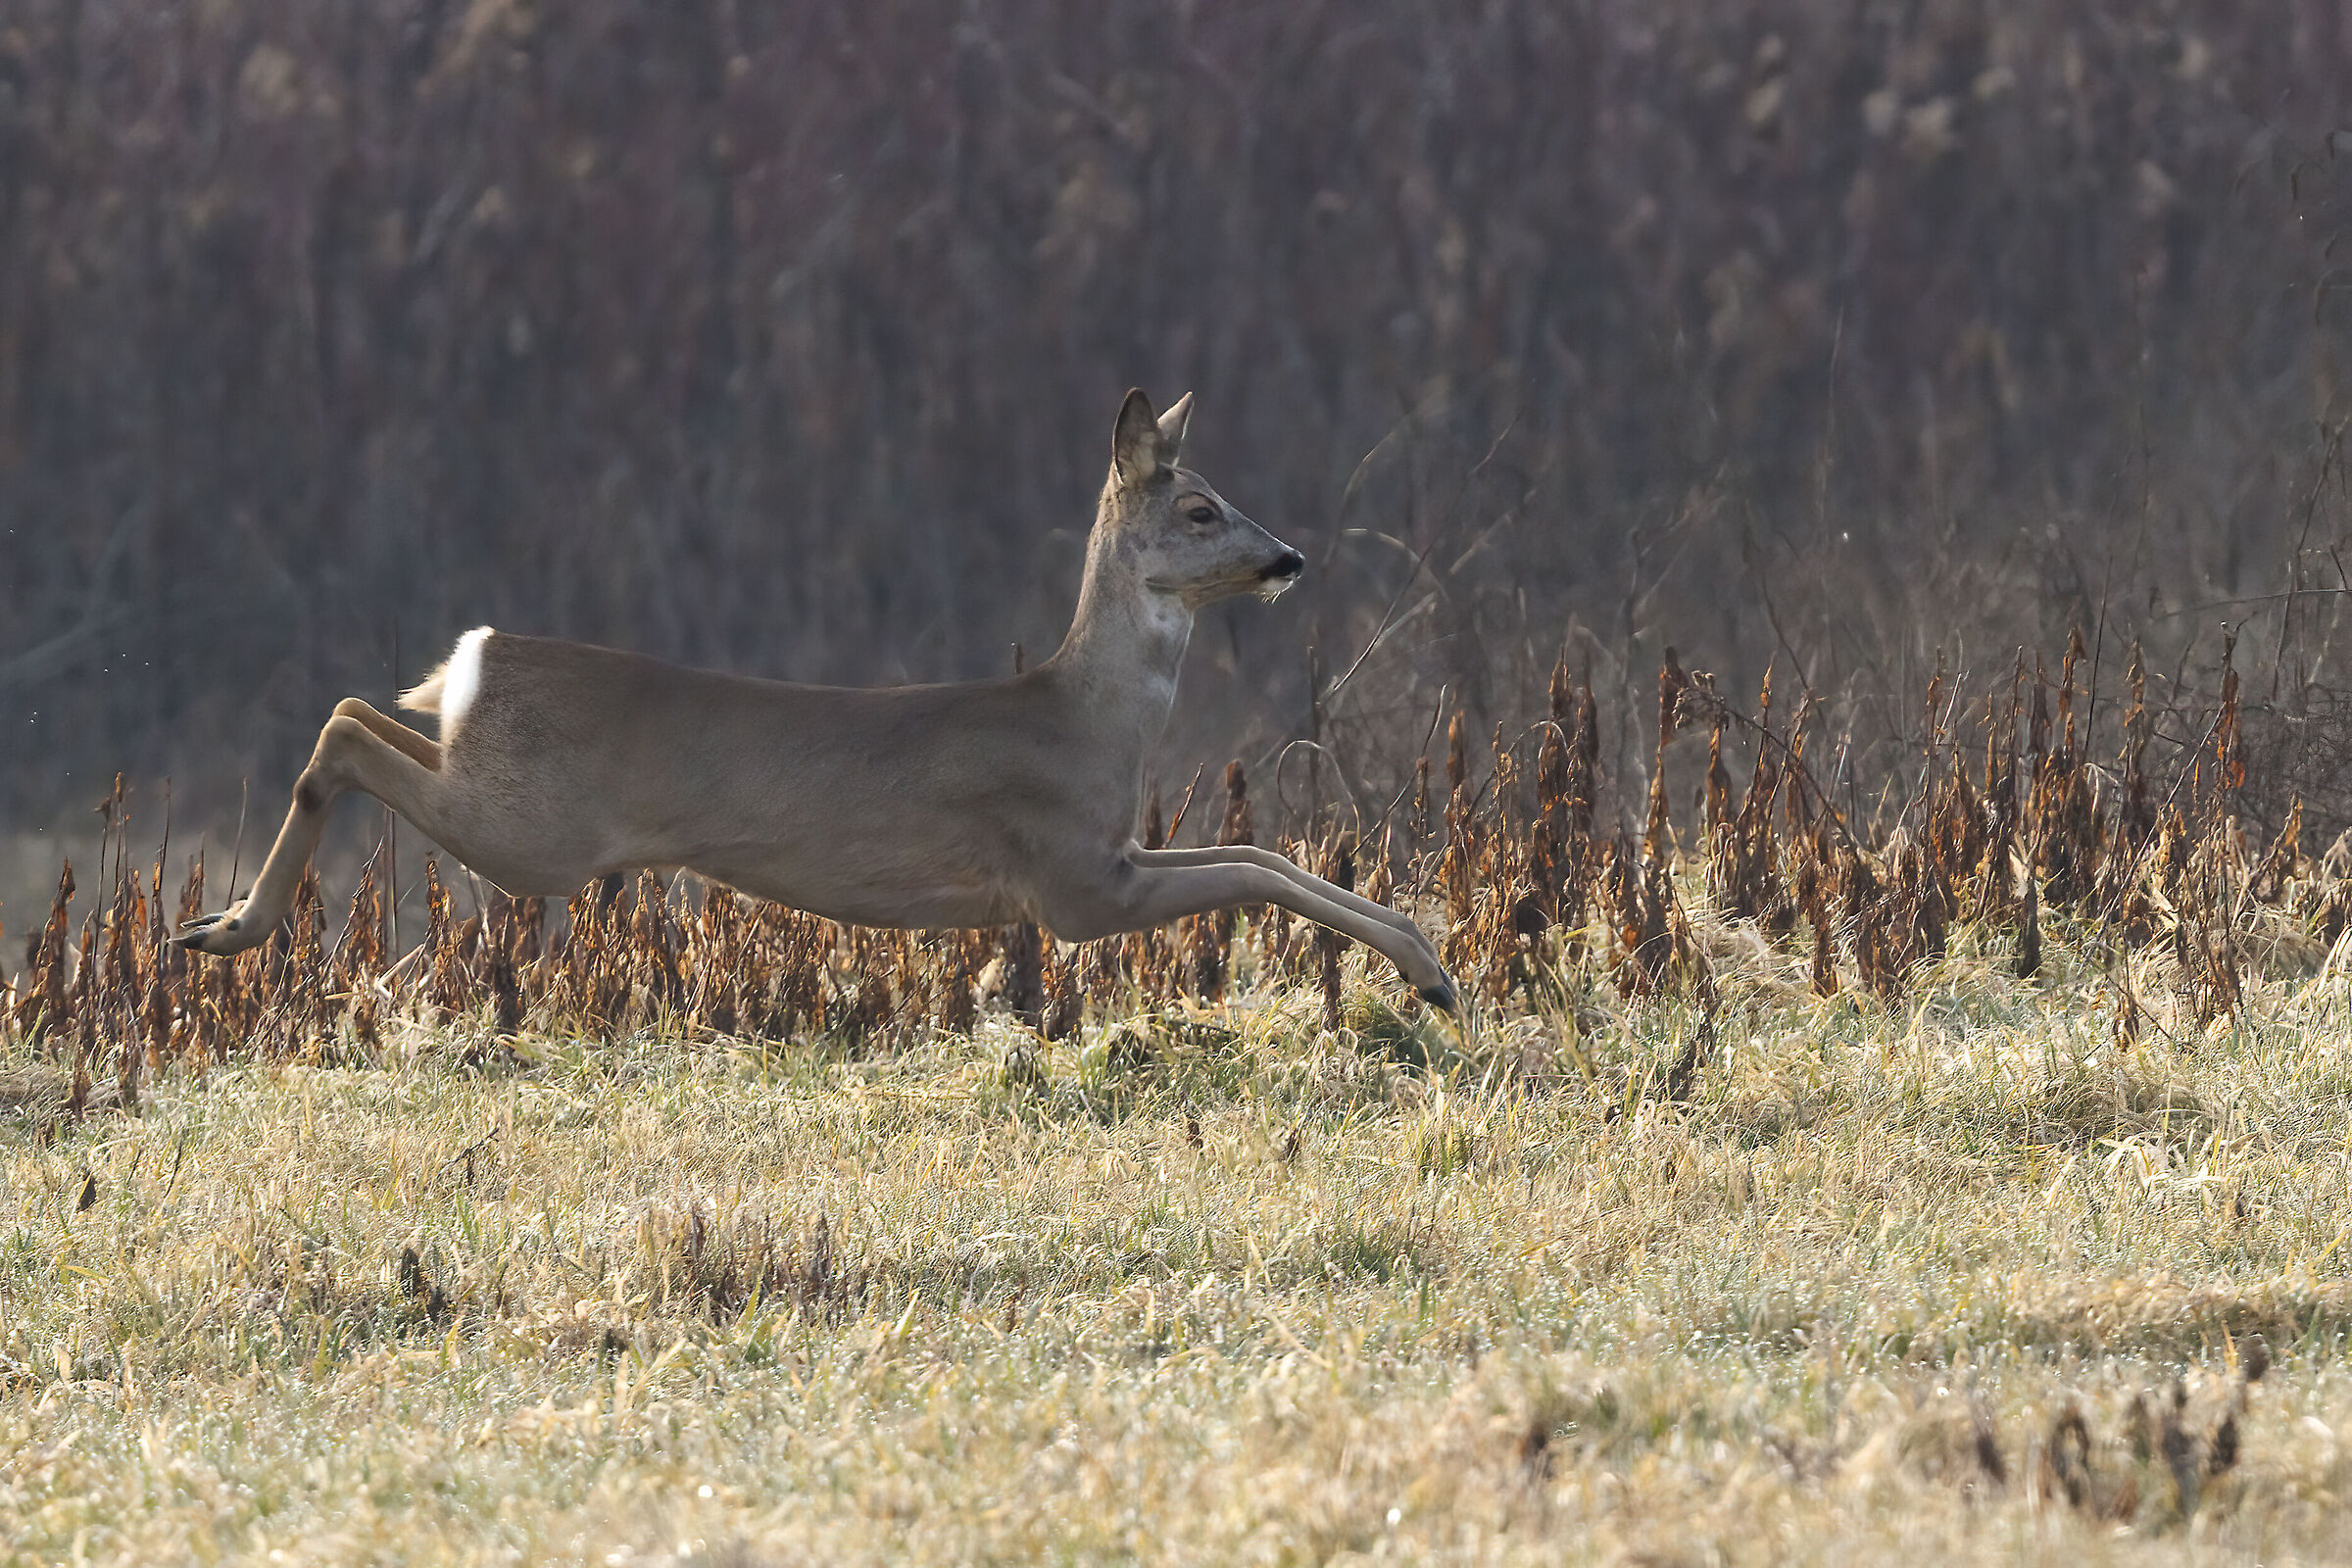 The jump of the roe deer...